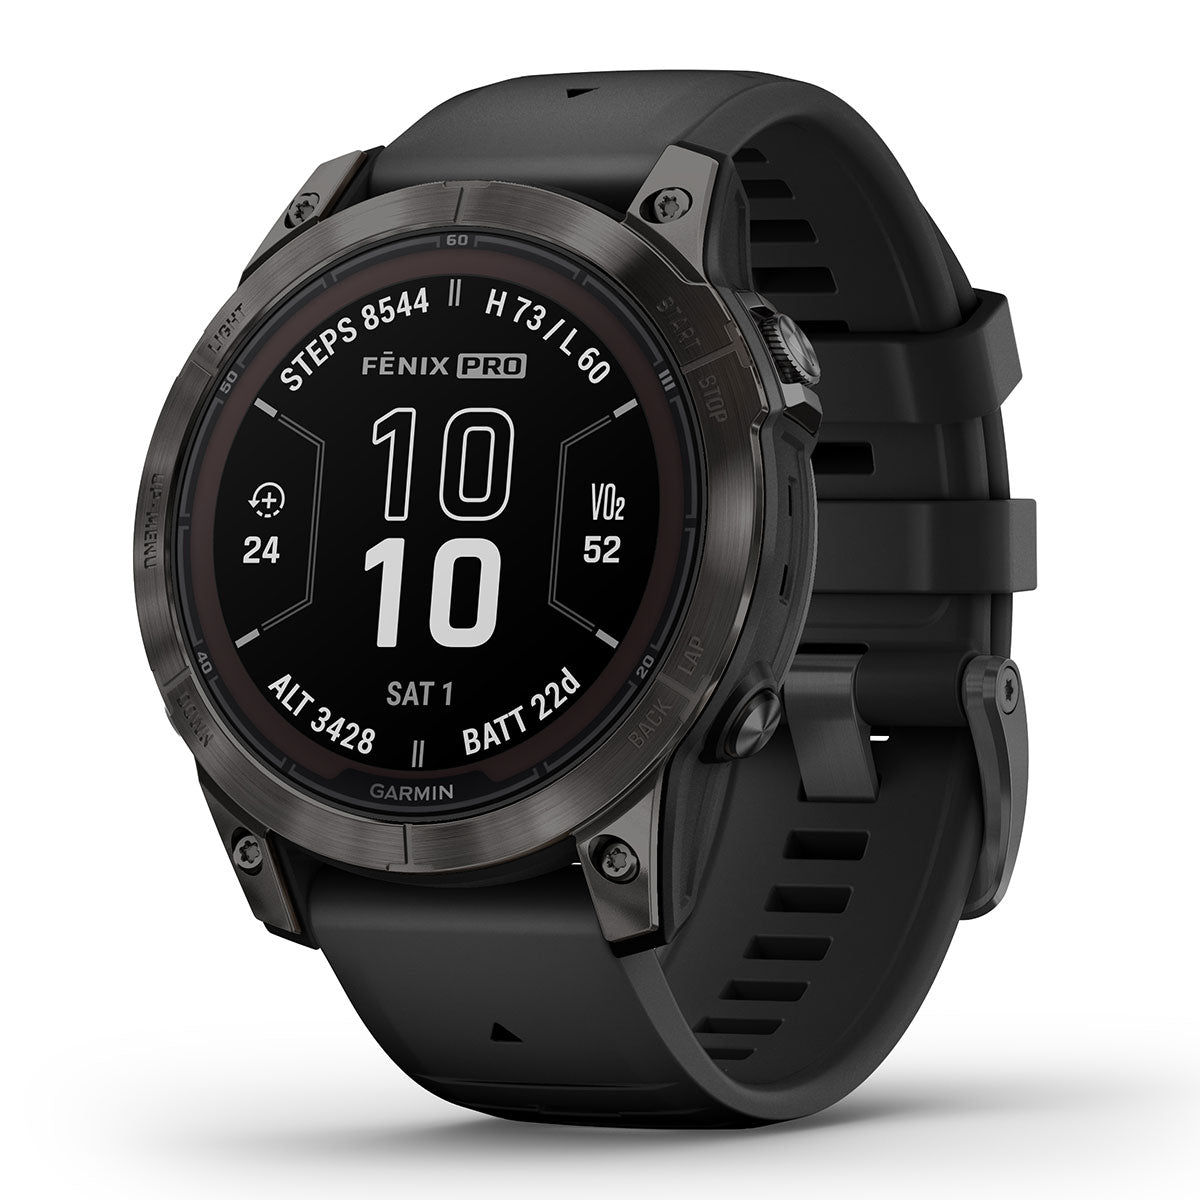  COROS APEX 2 GPS Outdoor Watch,1.2 Sapphire Screen,14 Days/40  Hours Battery Life,5 Satellite Systems, Offline Maps, Heart Rate Monitor,  Music, Triathlon, Multisport, Training Plan and Workout-Black : Electronics